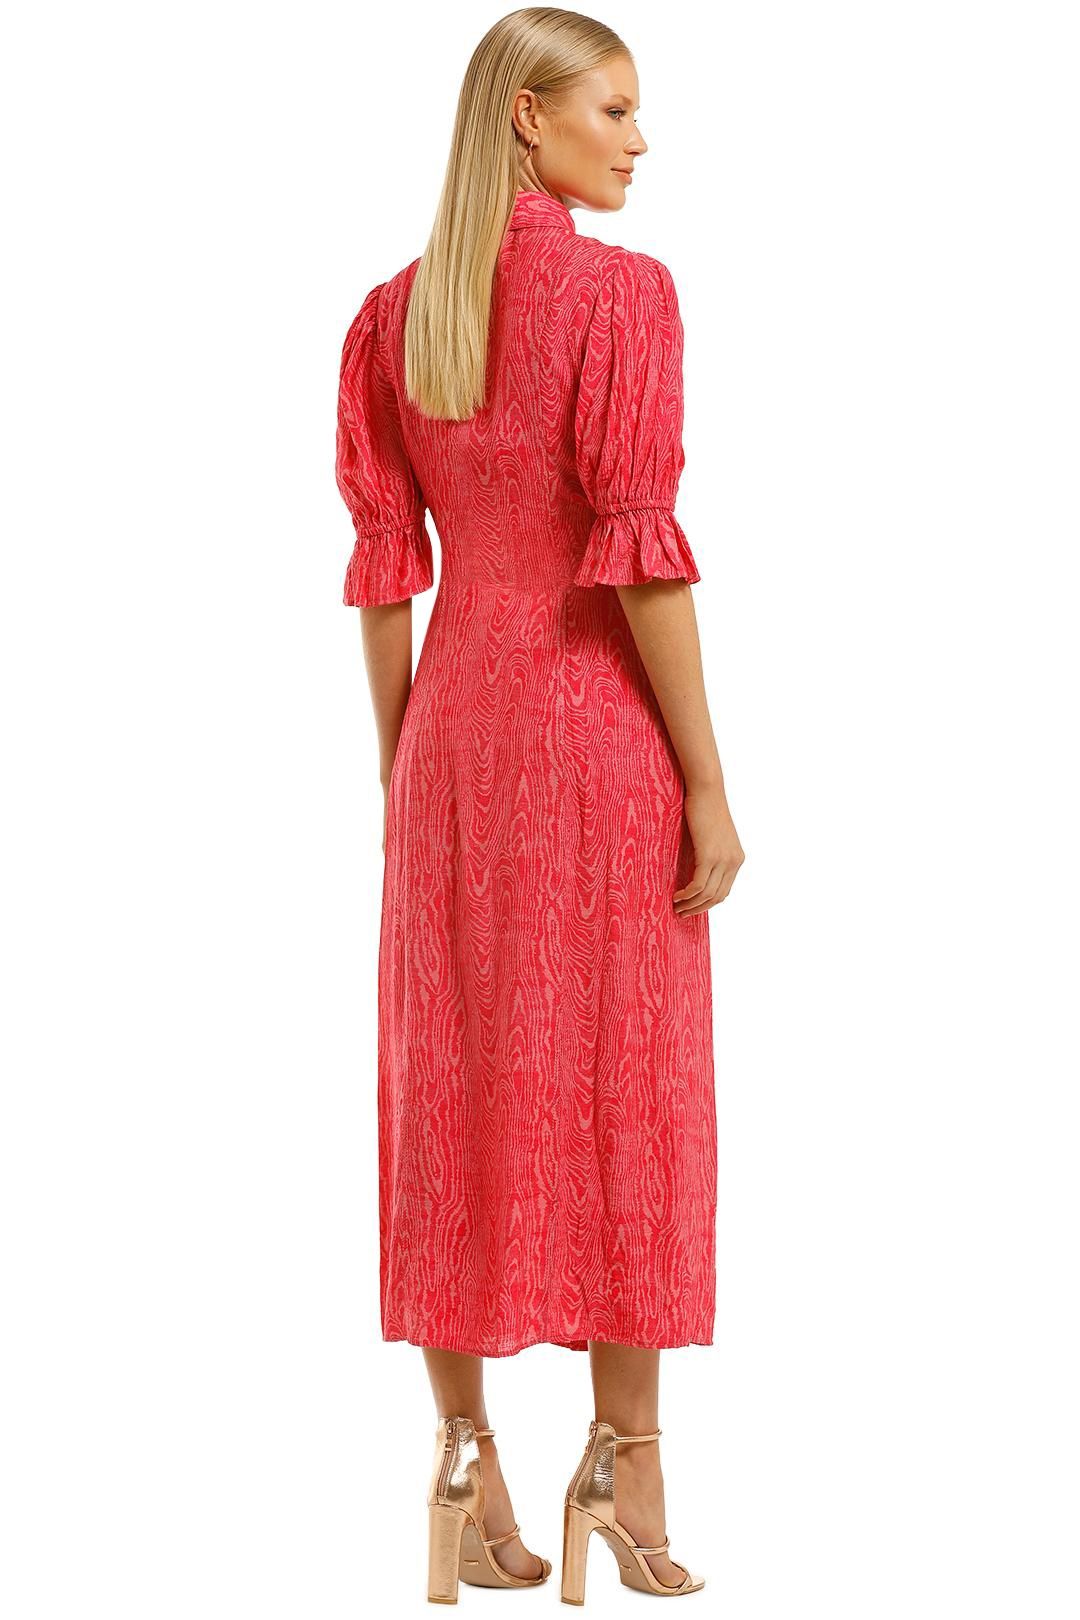 CMEO Collective Early On Dress Pink Woodgrain Midi